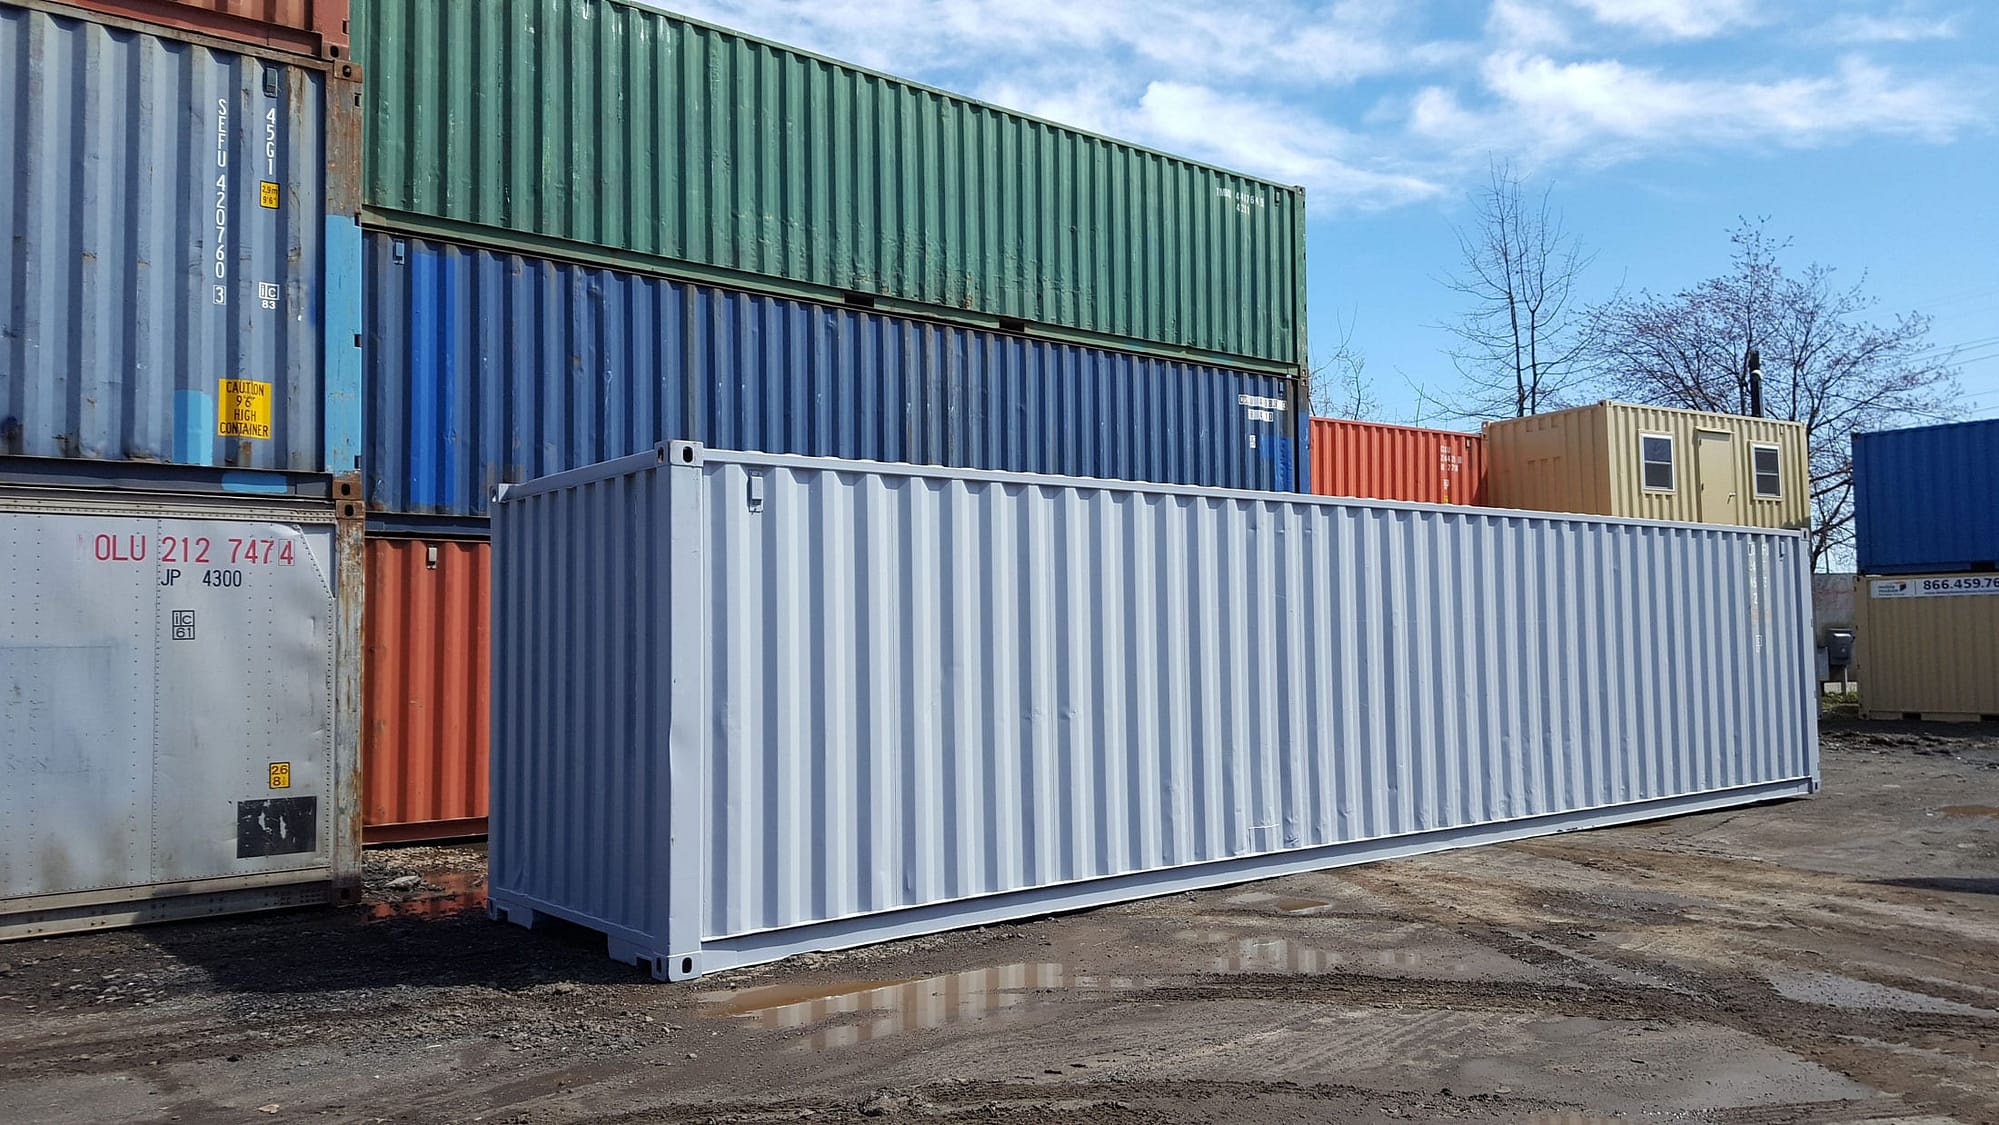 TRS offers flexible terms including painting a 40ft container for a fee